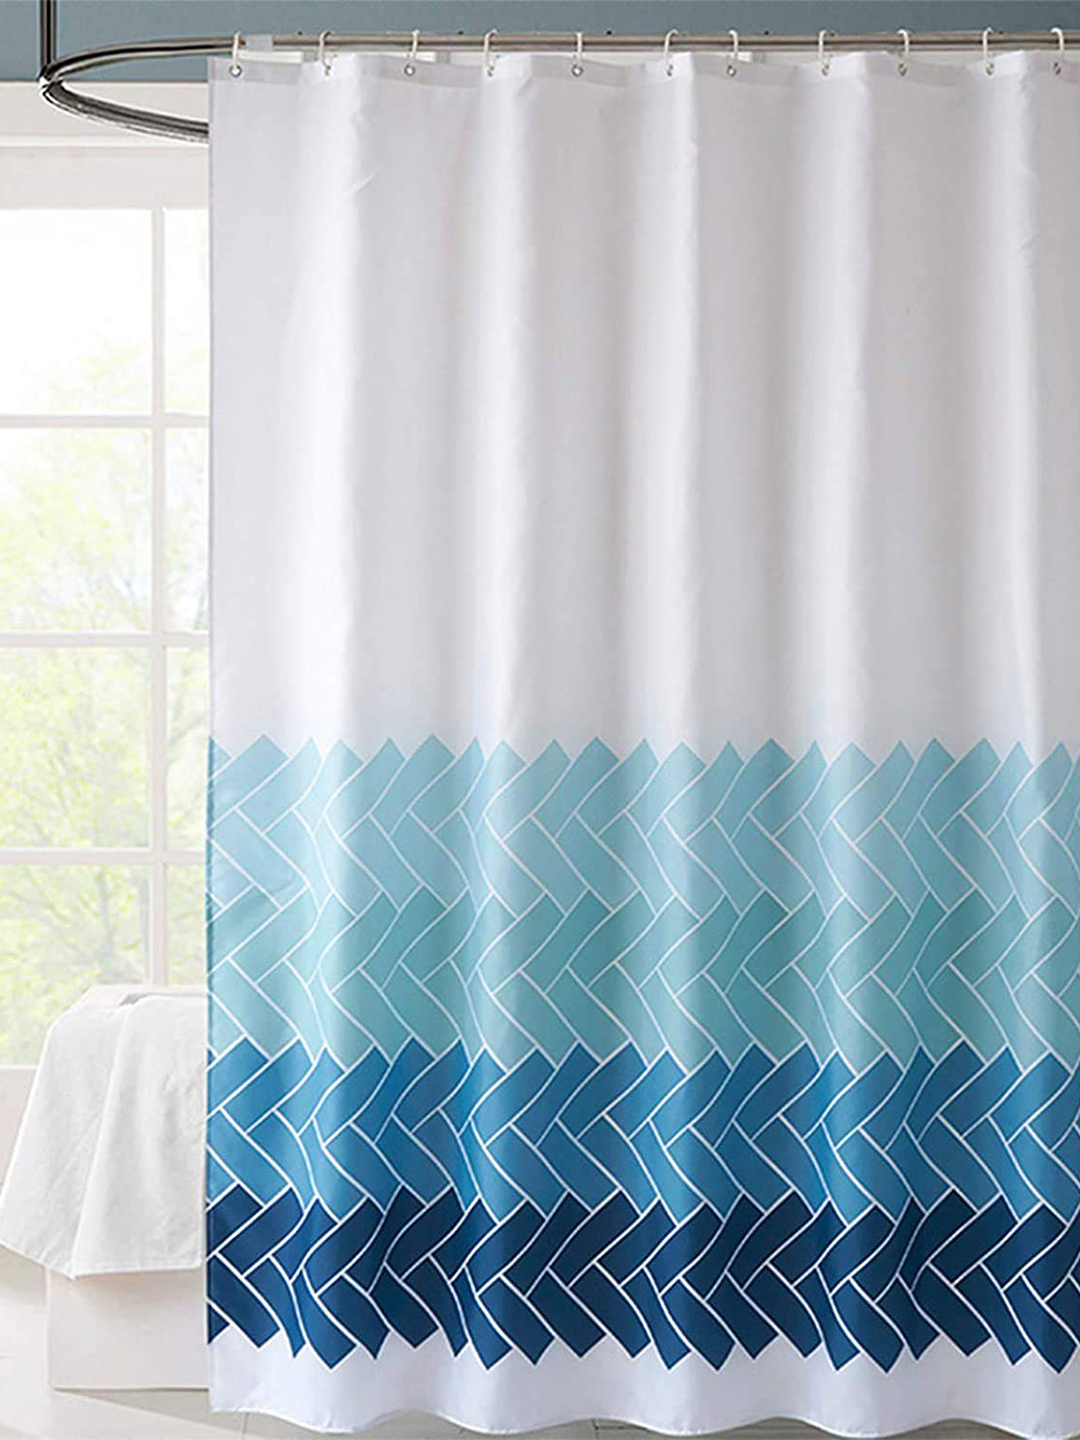 homewards Premium Digitally Printed Water Repellent Polyester Shower Curtain with 12 Hooks ,Multi Color Geometric Stripes Design